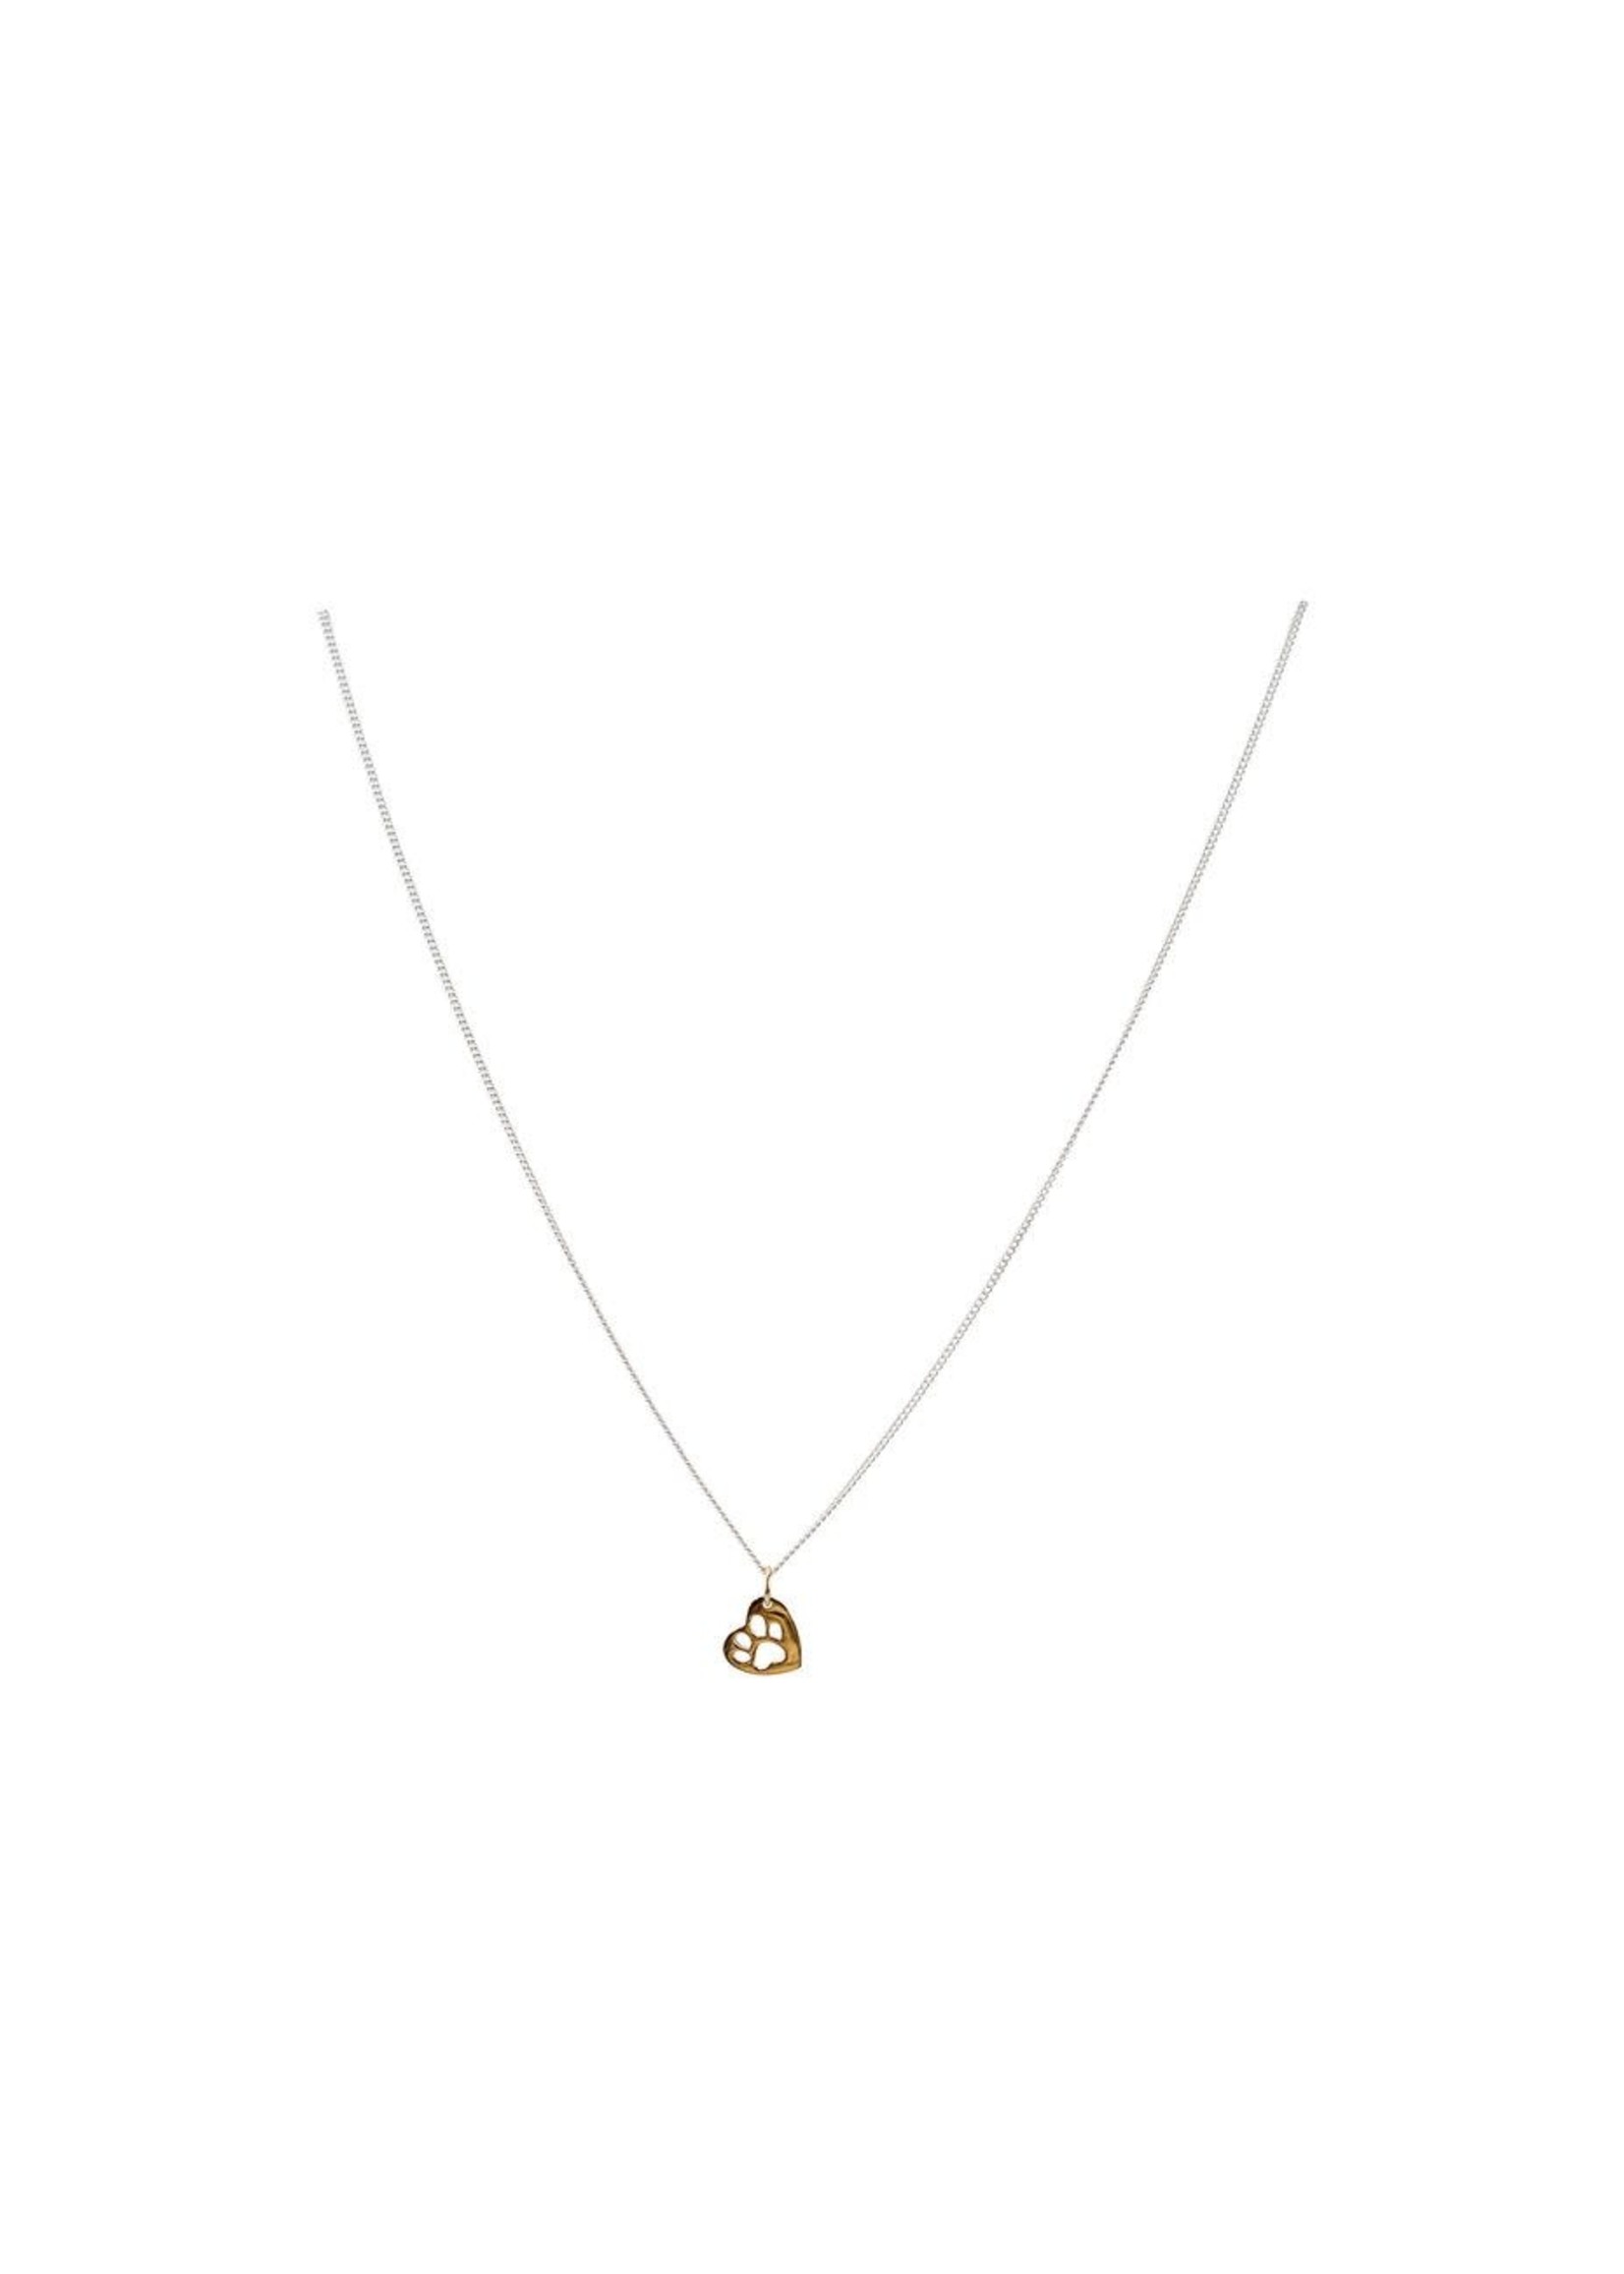 Mimi & Marge SMALL BAWA NECKLACE-14K GOLD